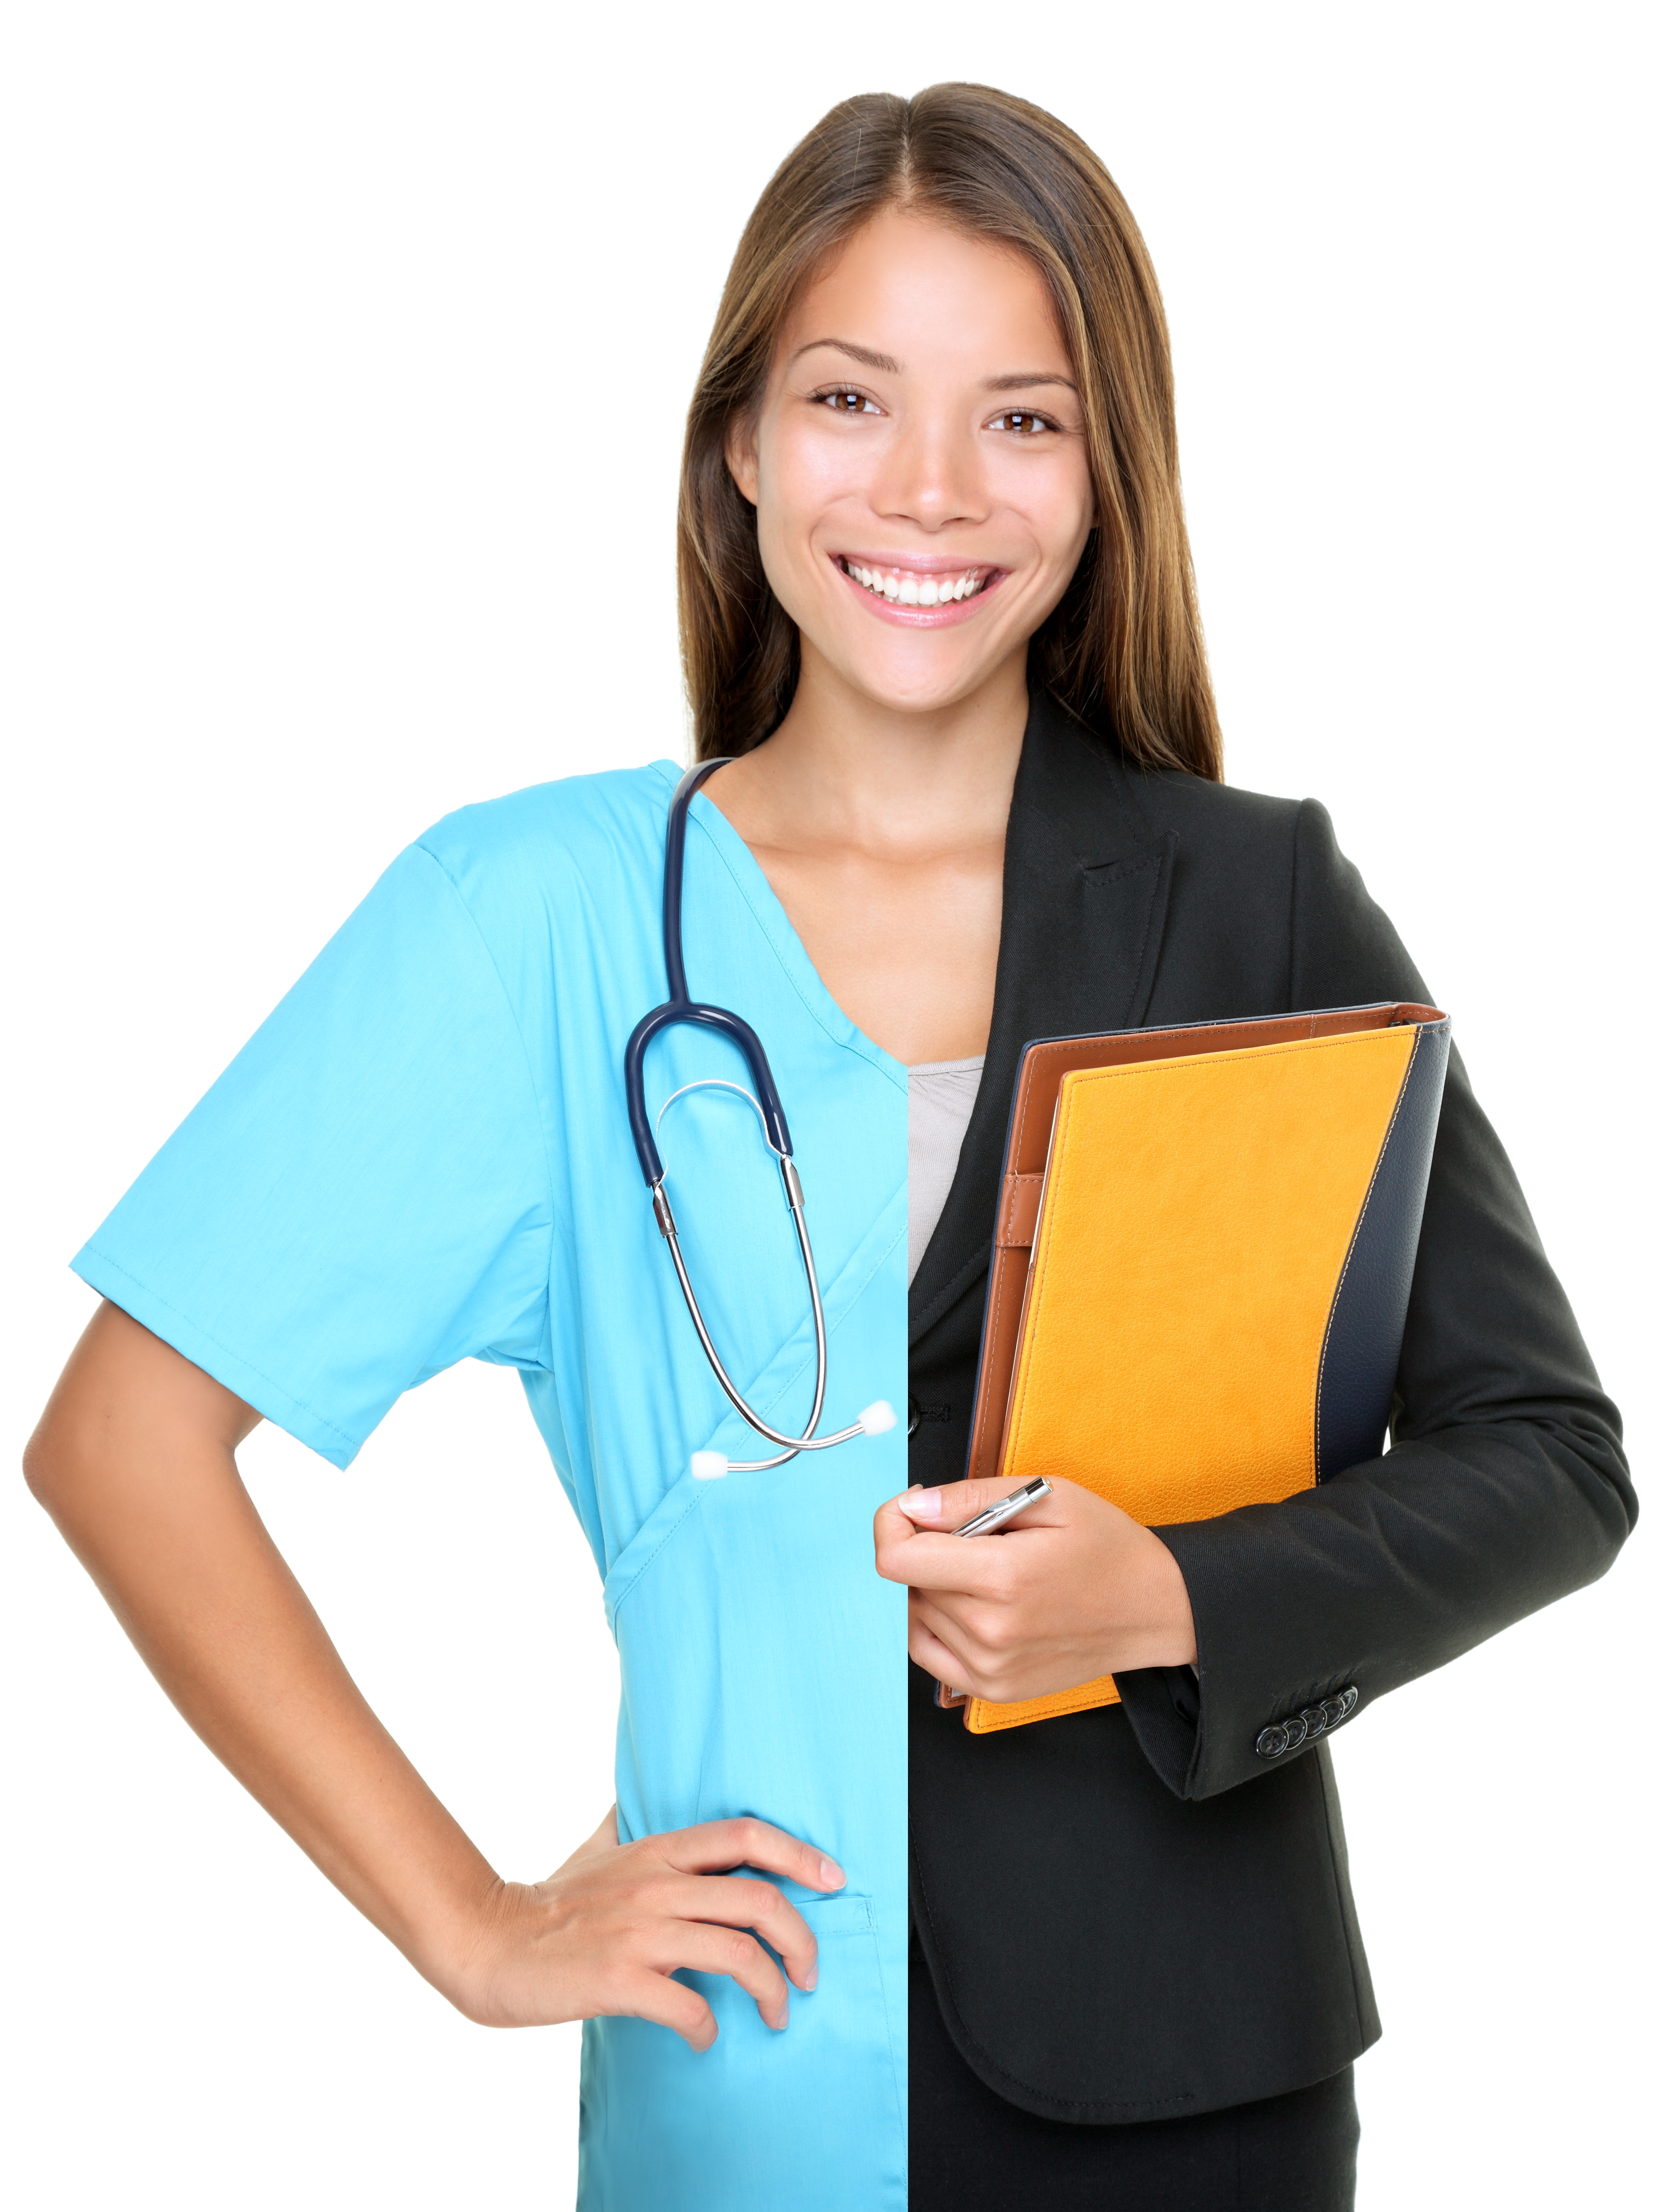 Careers Stemming from an Education in Health Care Policy